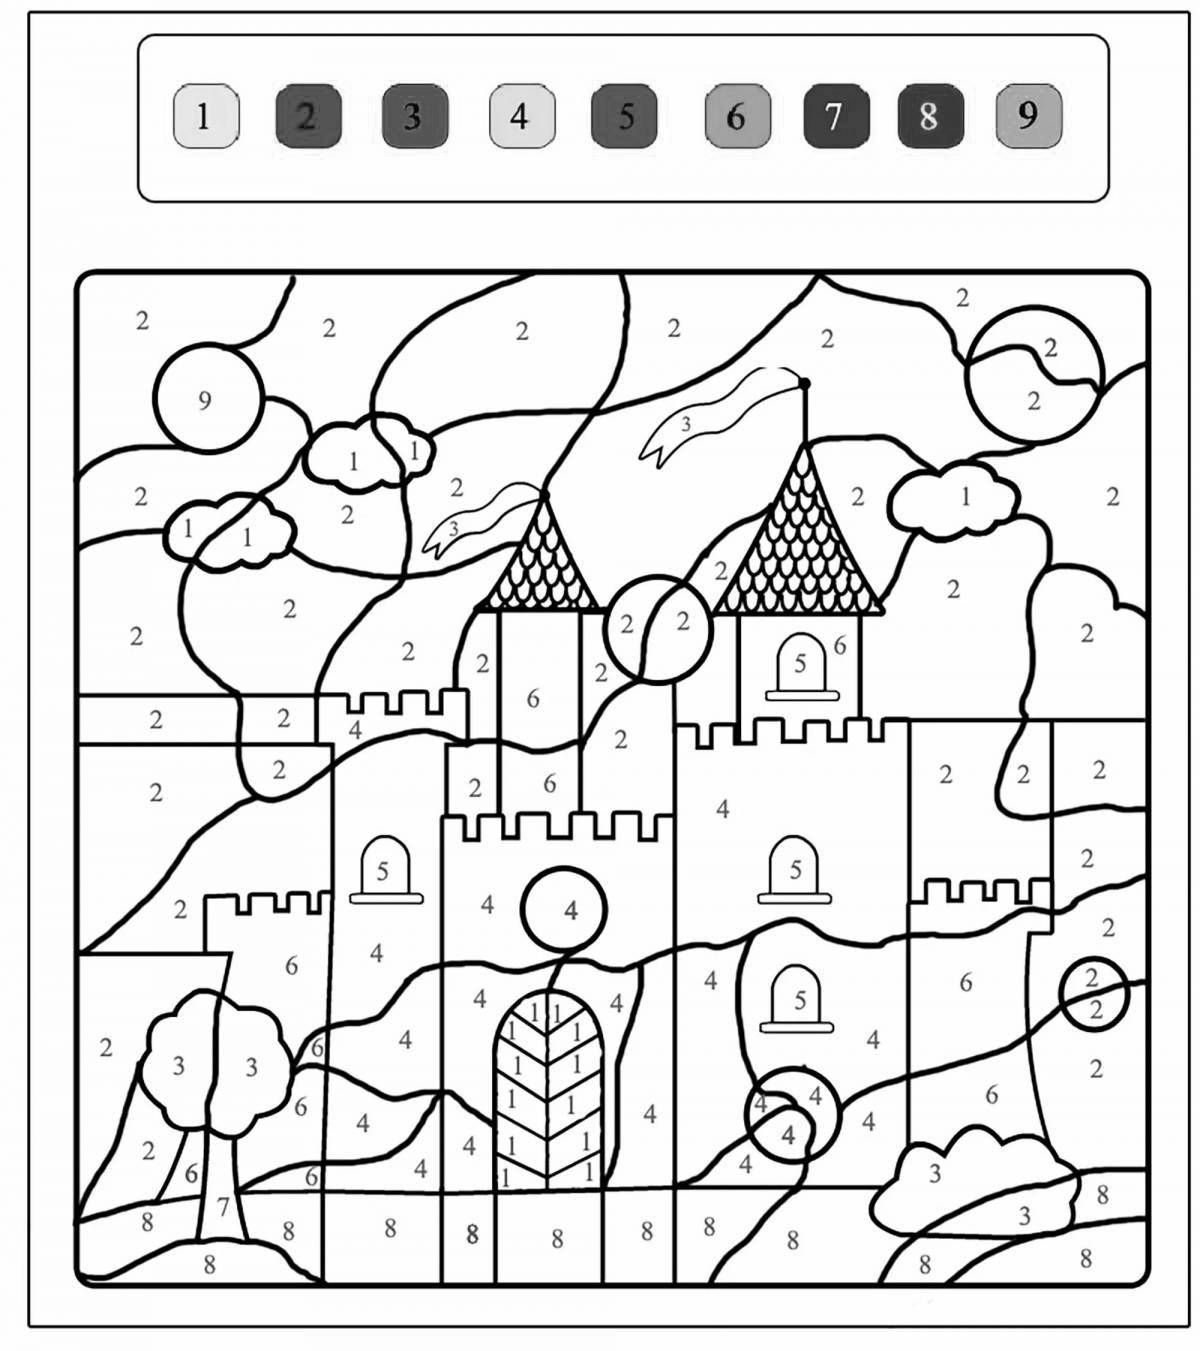 Fascinating coloring game download game by numbers